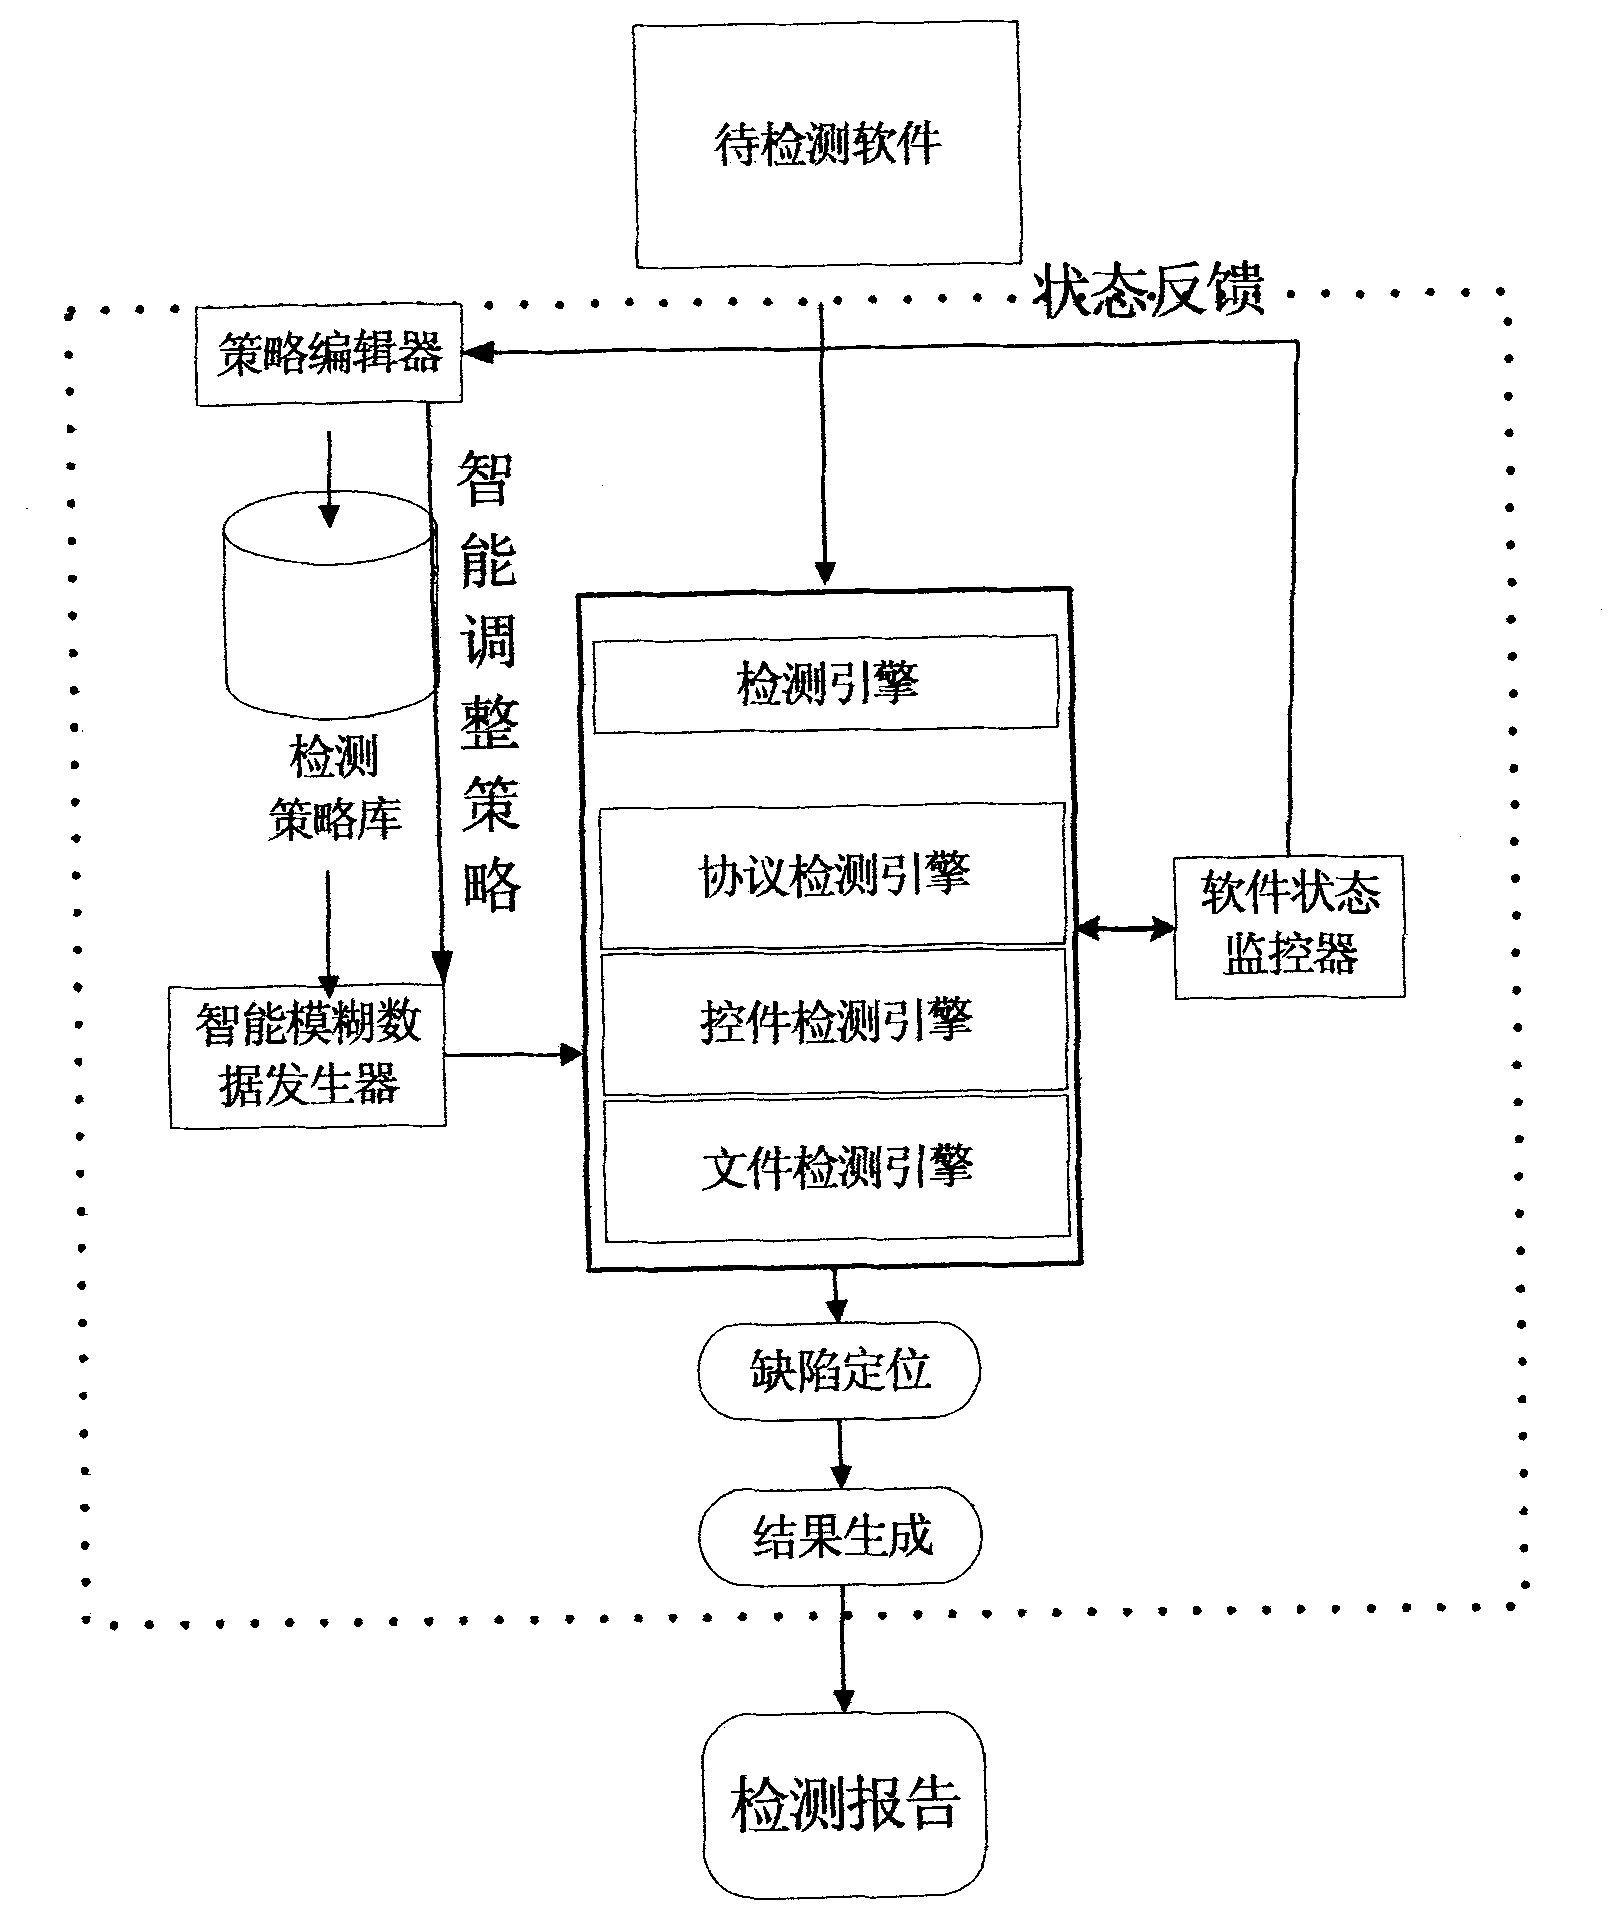 Method and system for detecting quality defect of software based on intelligent dynamic fuzzy detection